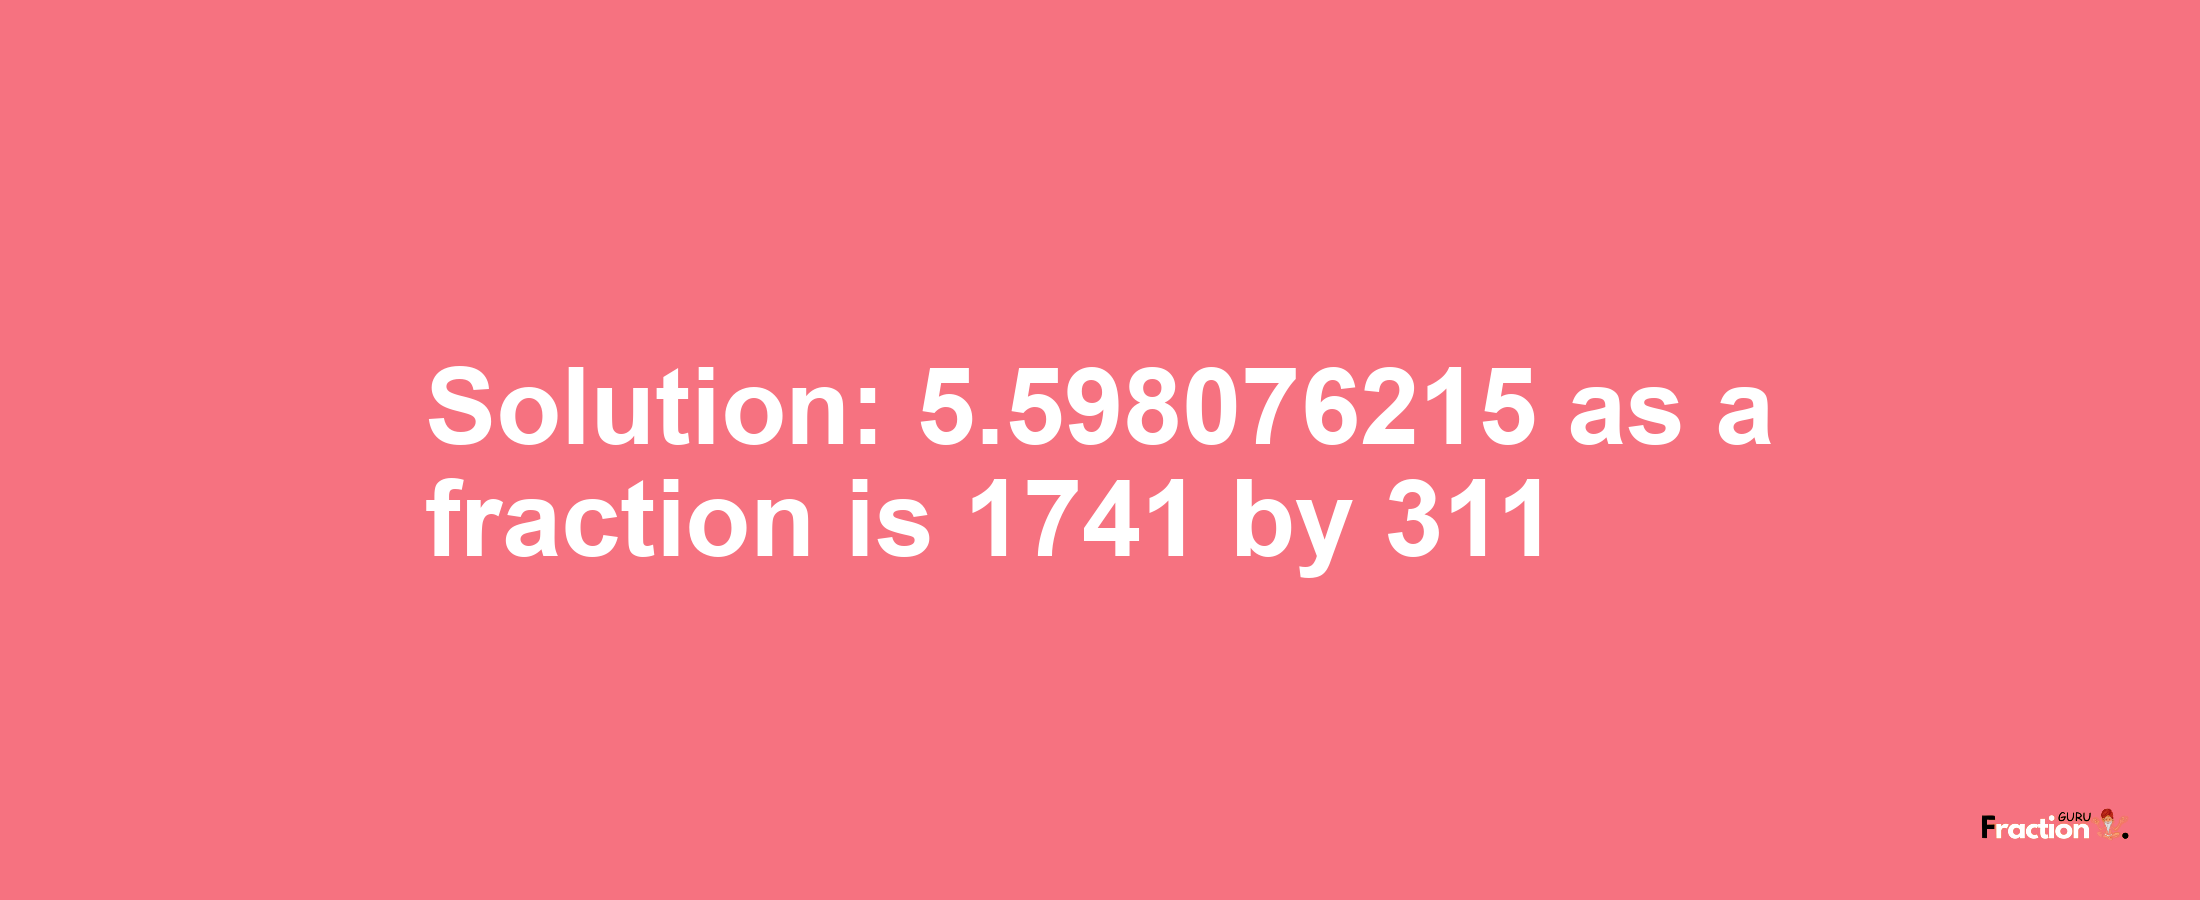 Solution:5.598076215 as a fraction is 1741/311